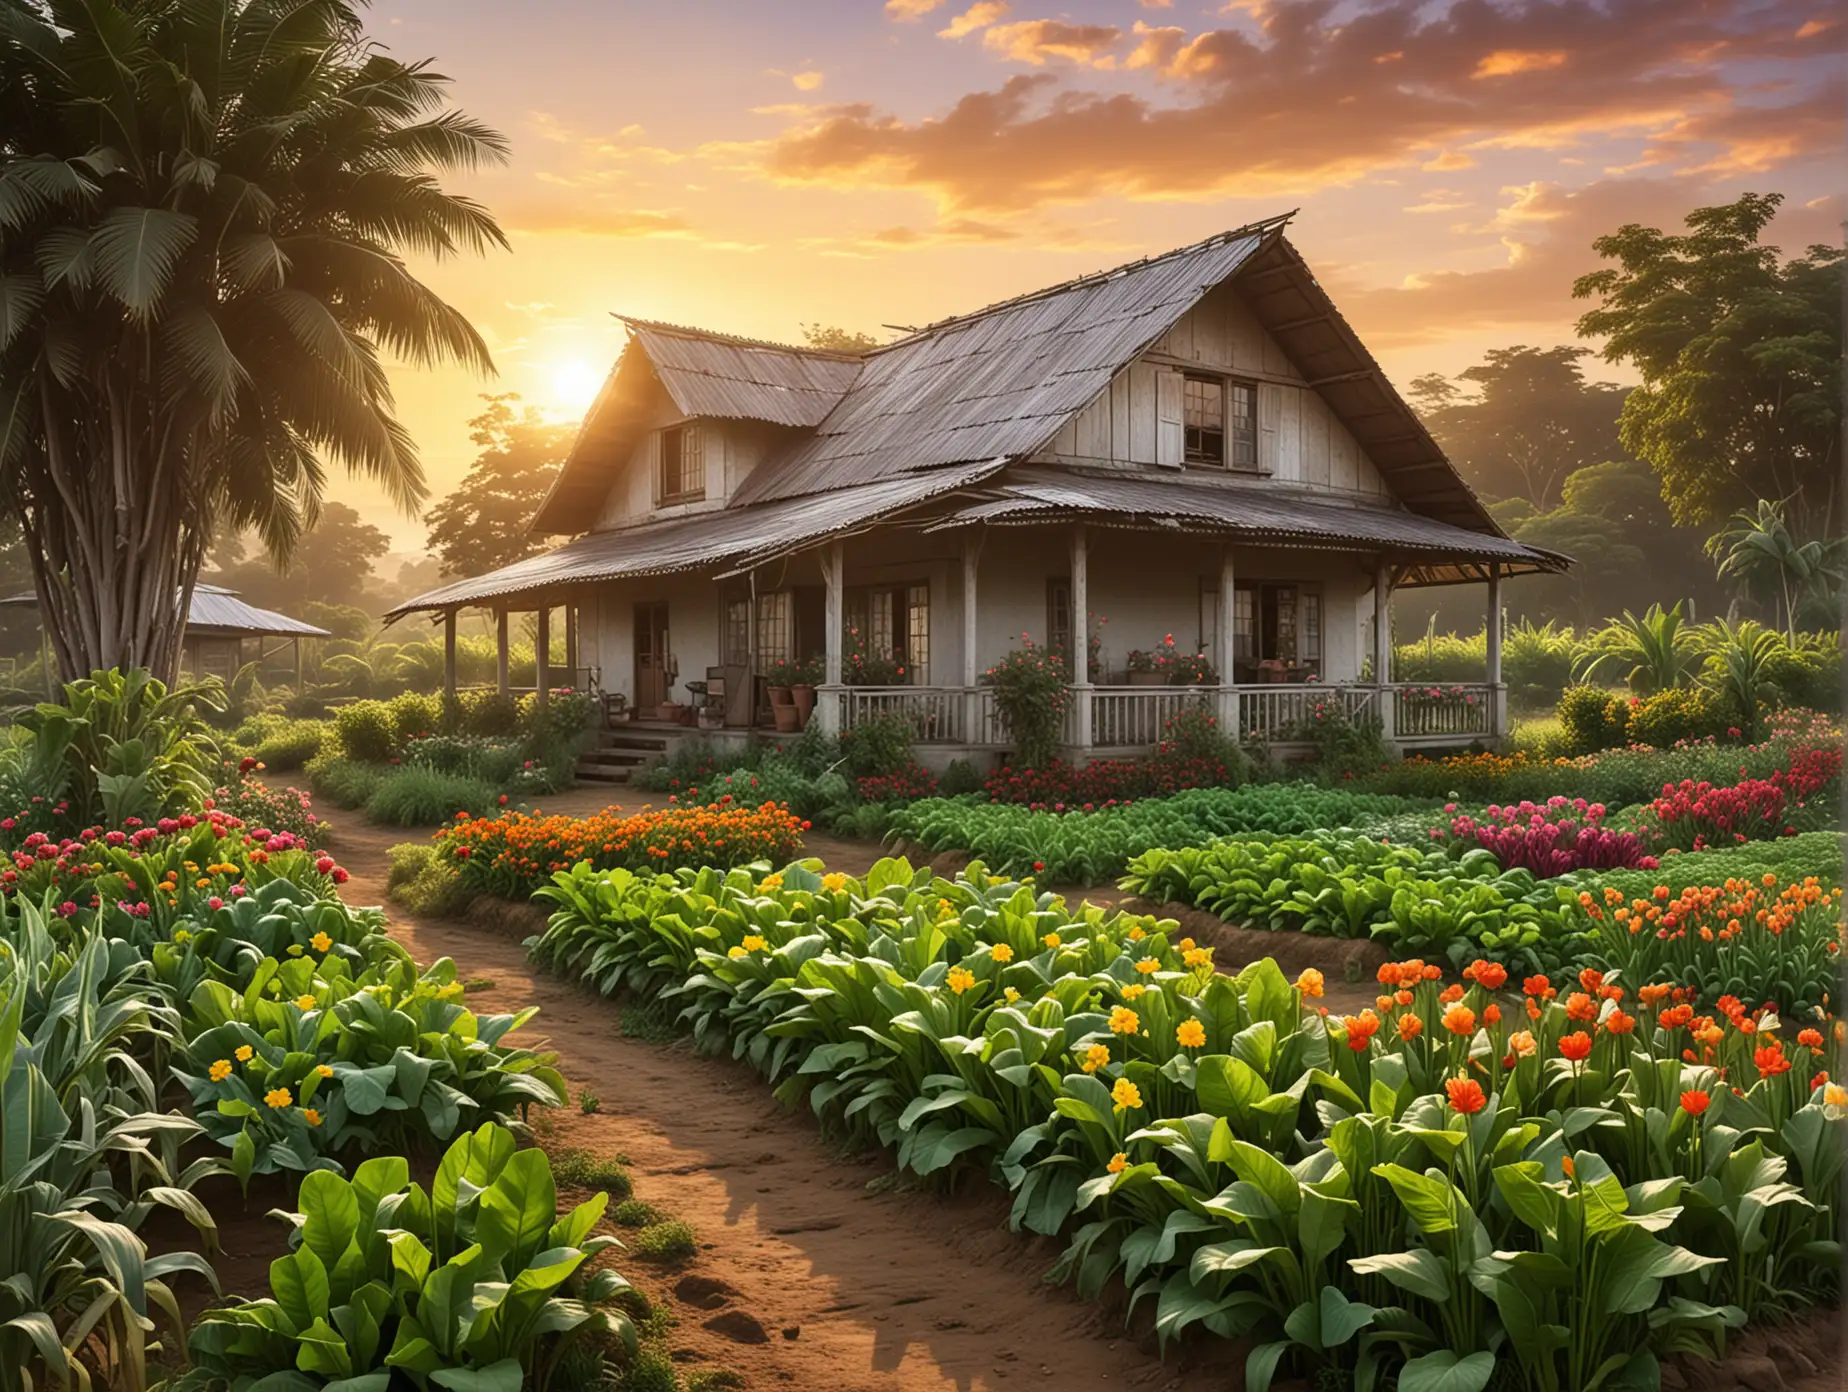 digital art, a typical farm house in Philippines surround by crops, vegetables and a flower garden, with sunrise on the background